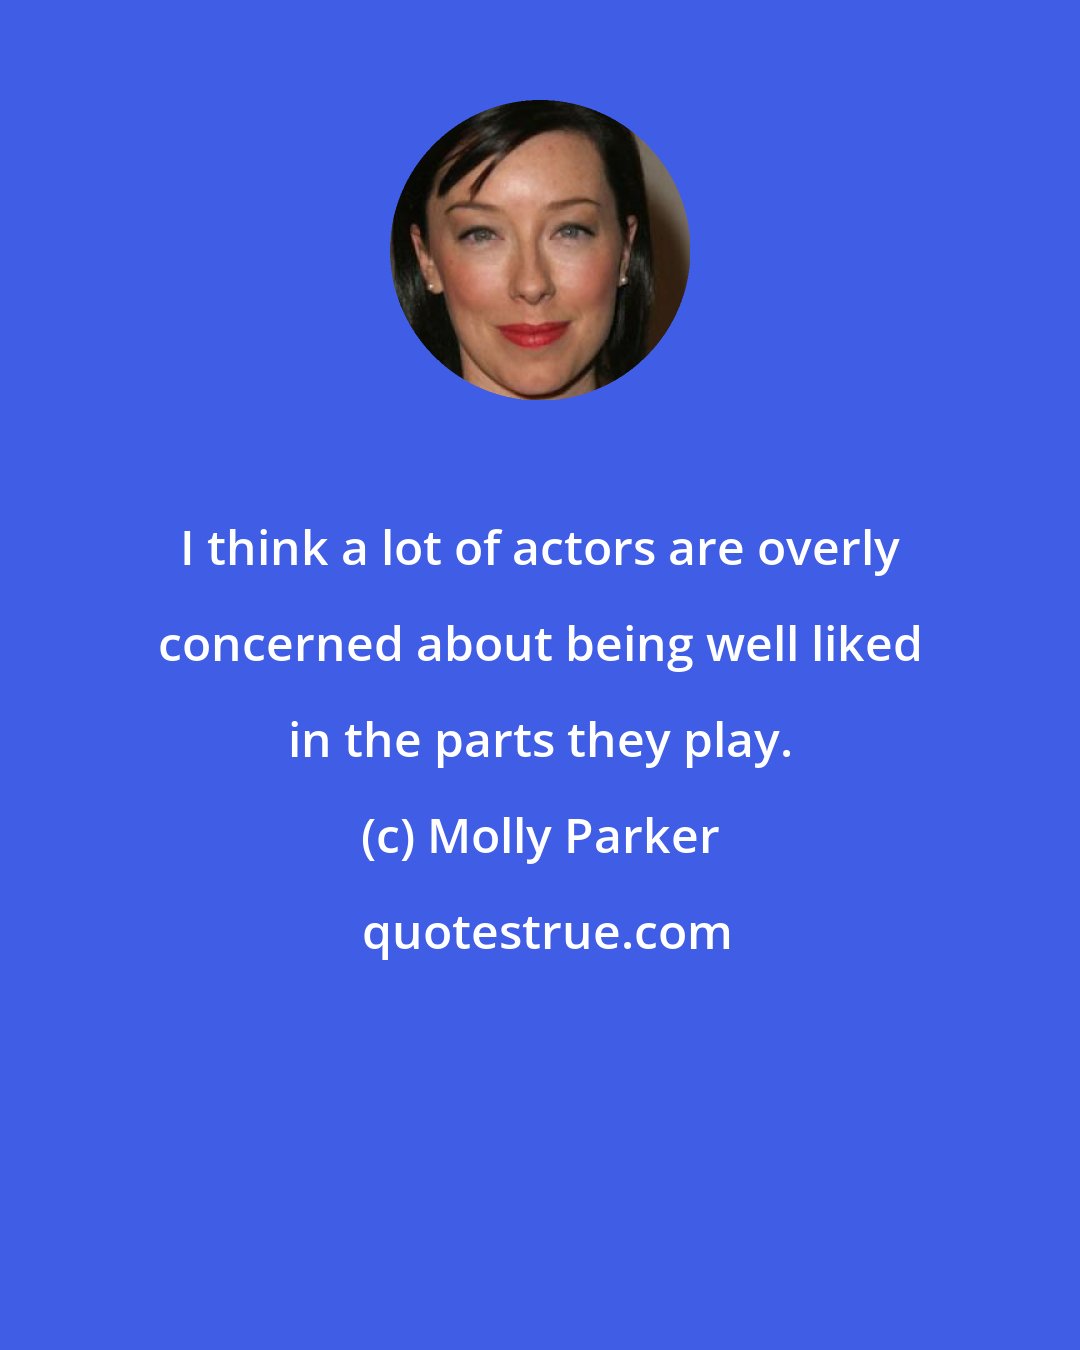 Molly Parker: I think a lot of actors are overly concerned about being well liked in the parts they play.